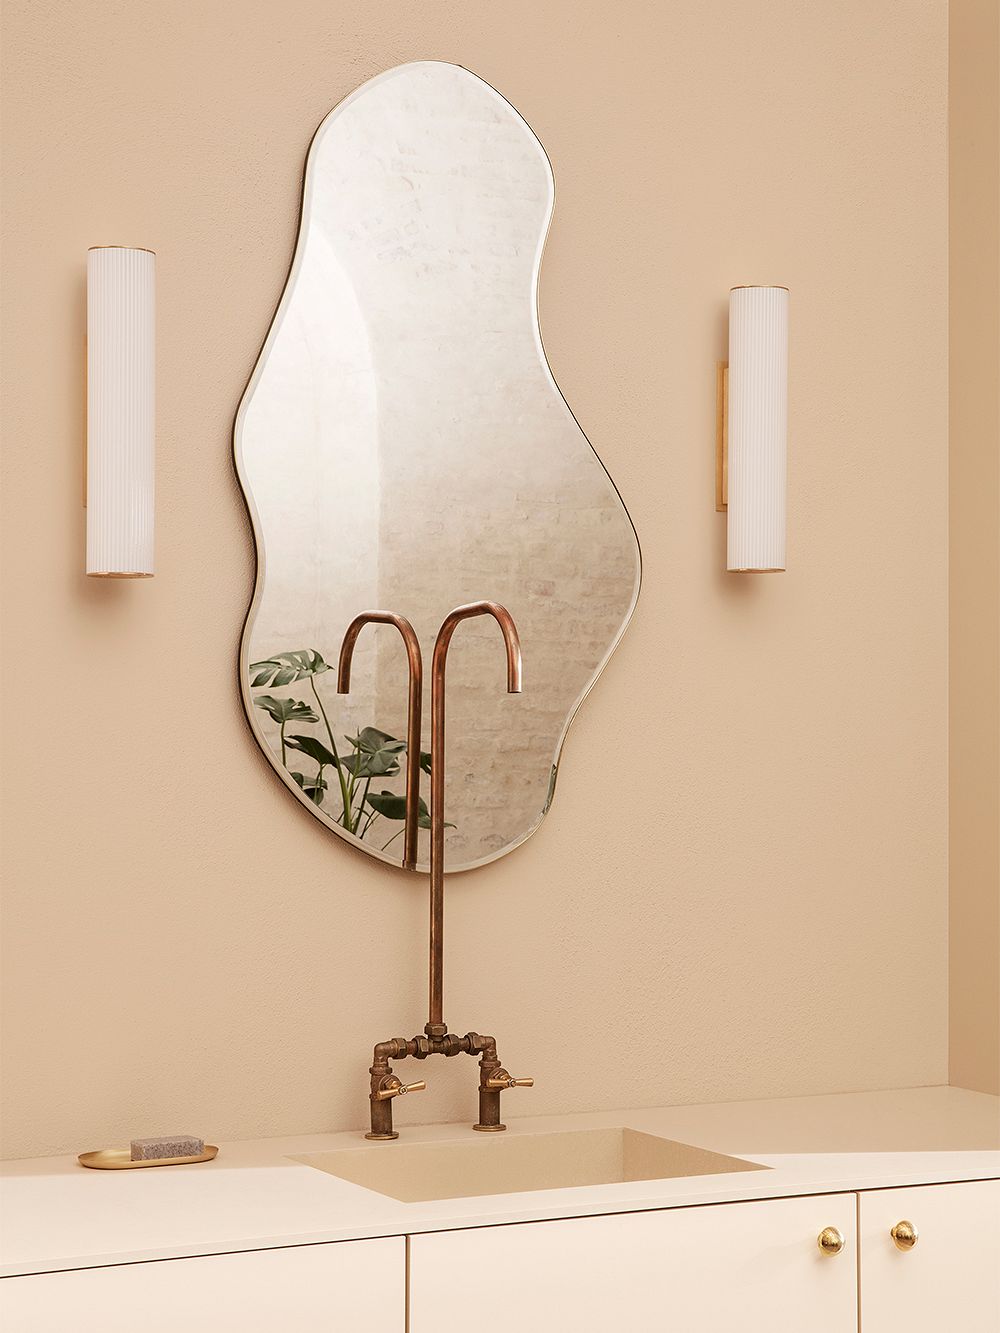 An image of ferm LIVING's Vuelta wall lamps and Pond mirror as part of the bathroom decor.